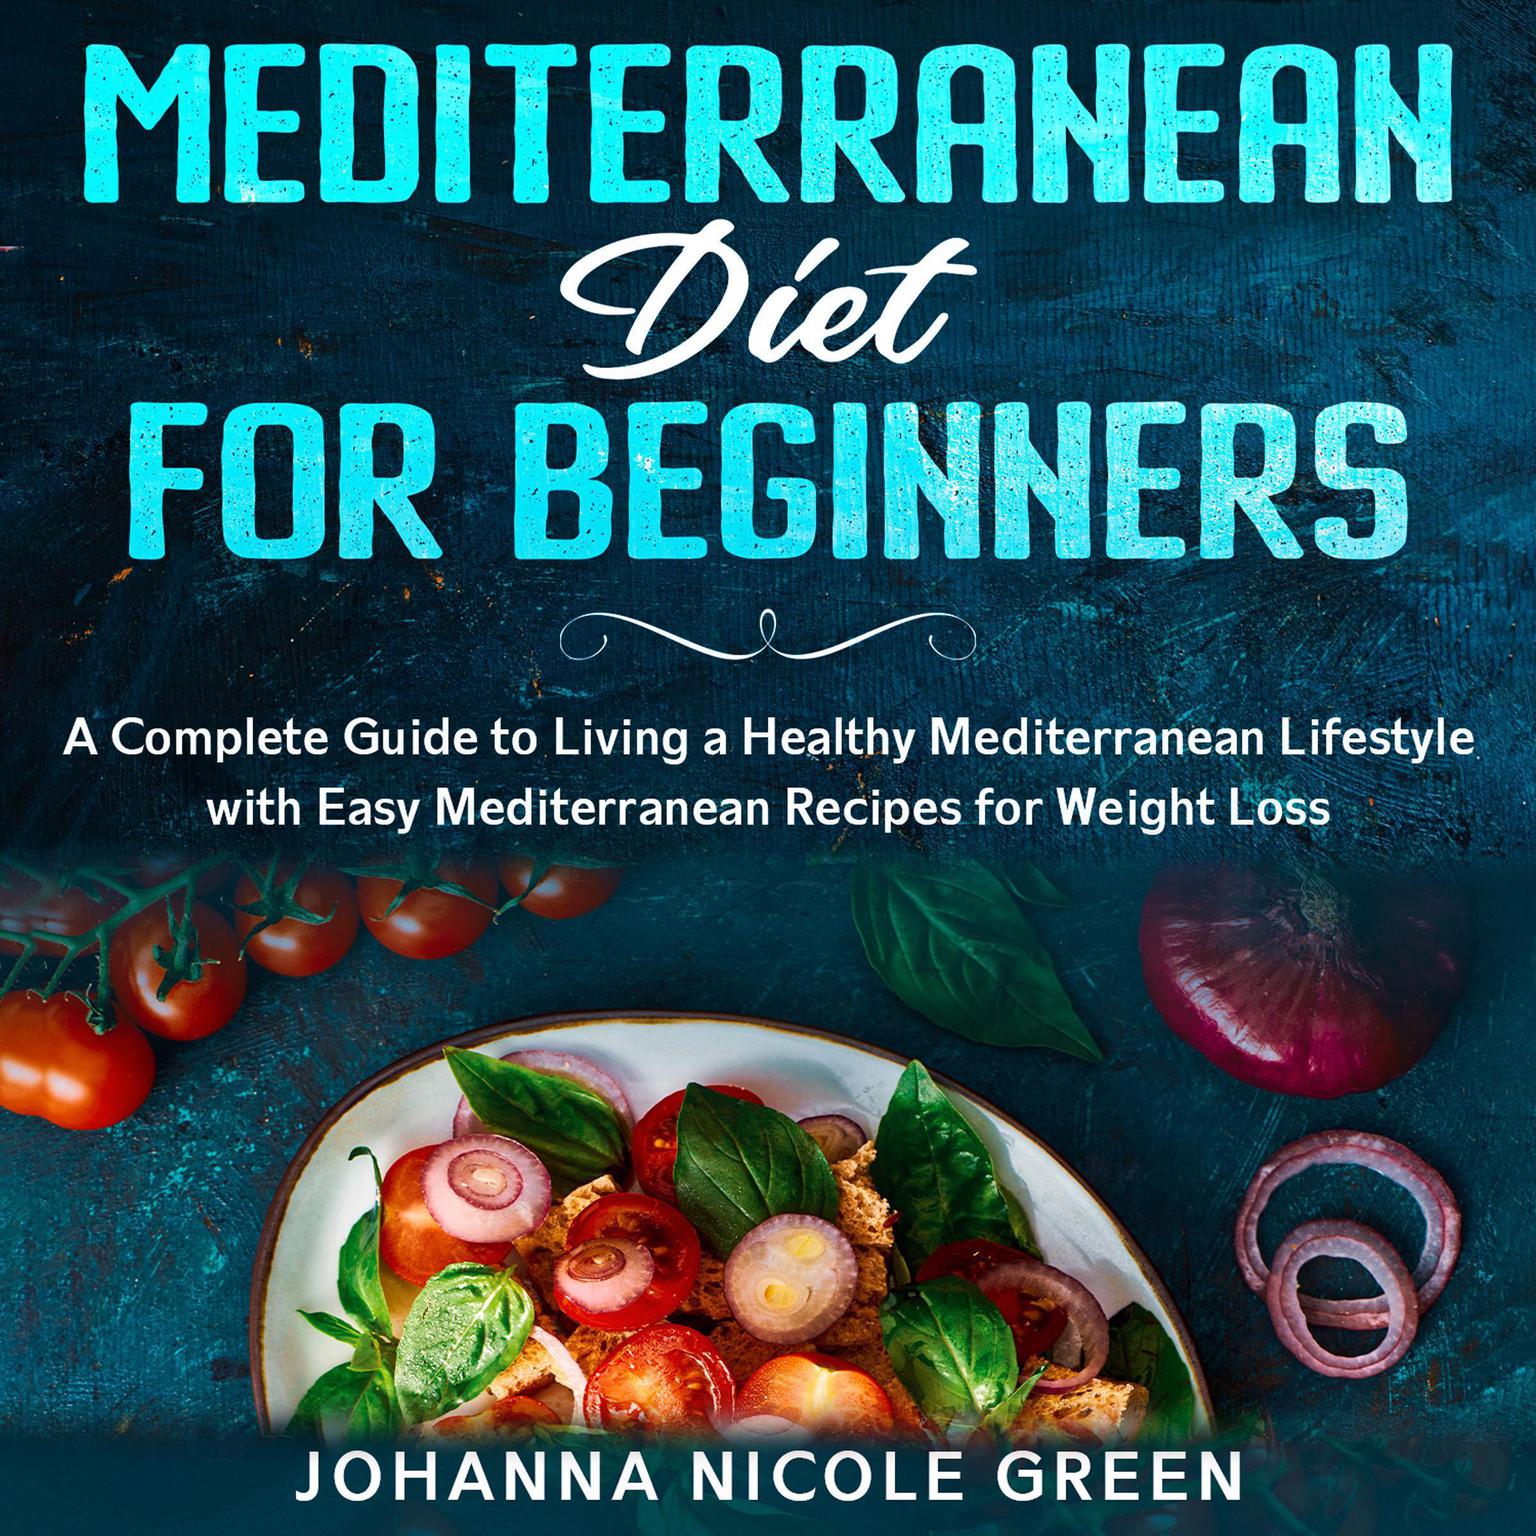 Mediterranean Diet for Beginners: A Complete Guide to Living a Healthy Mediterranean Lifestyle with Easy Mediterranean Recipes for Weight Loss Audiobook, by Johanna Nicole Green